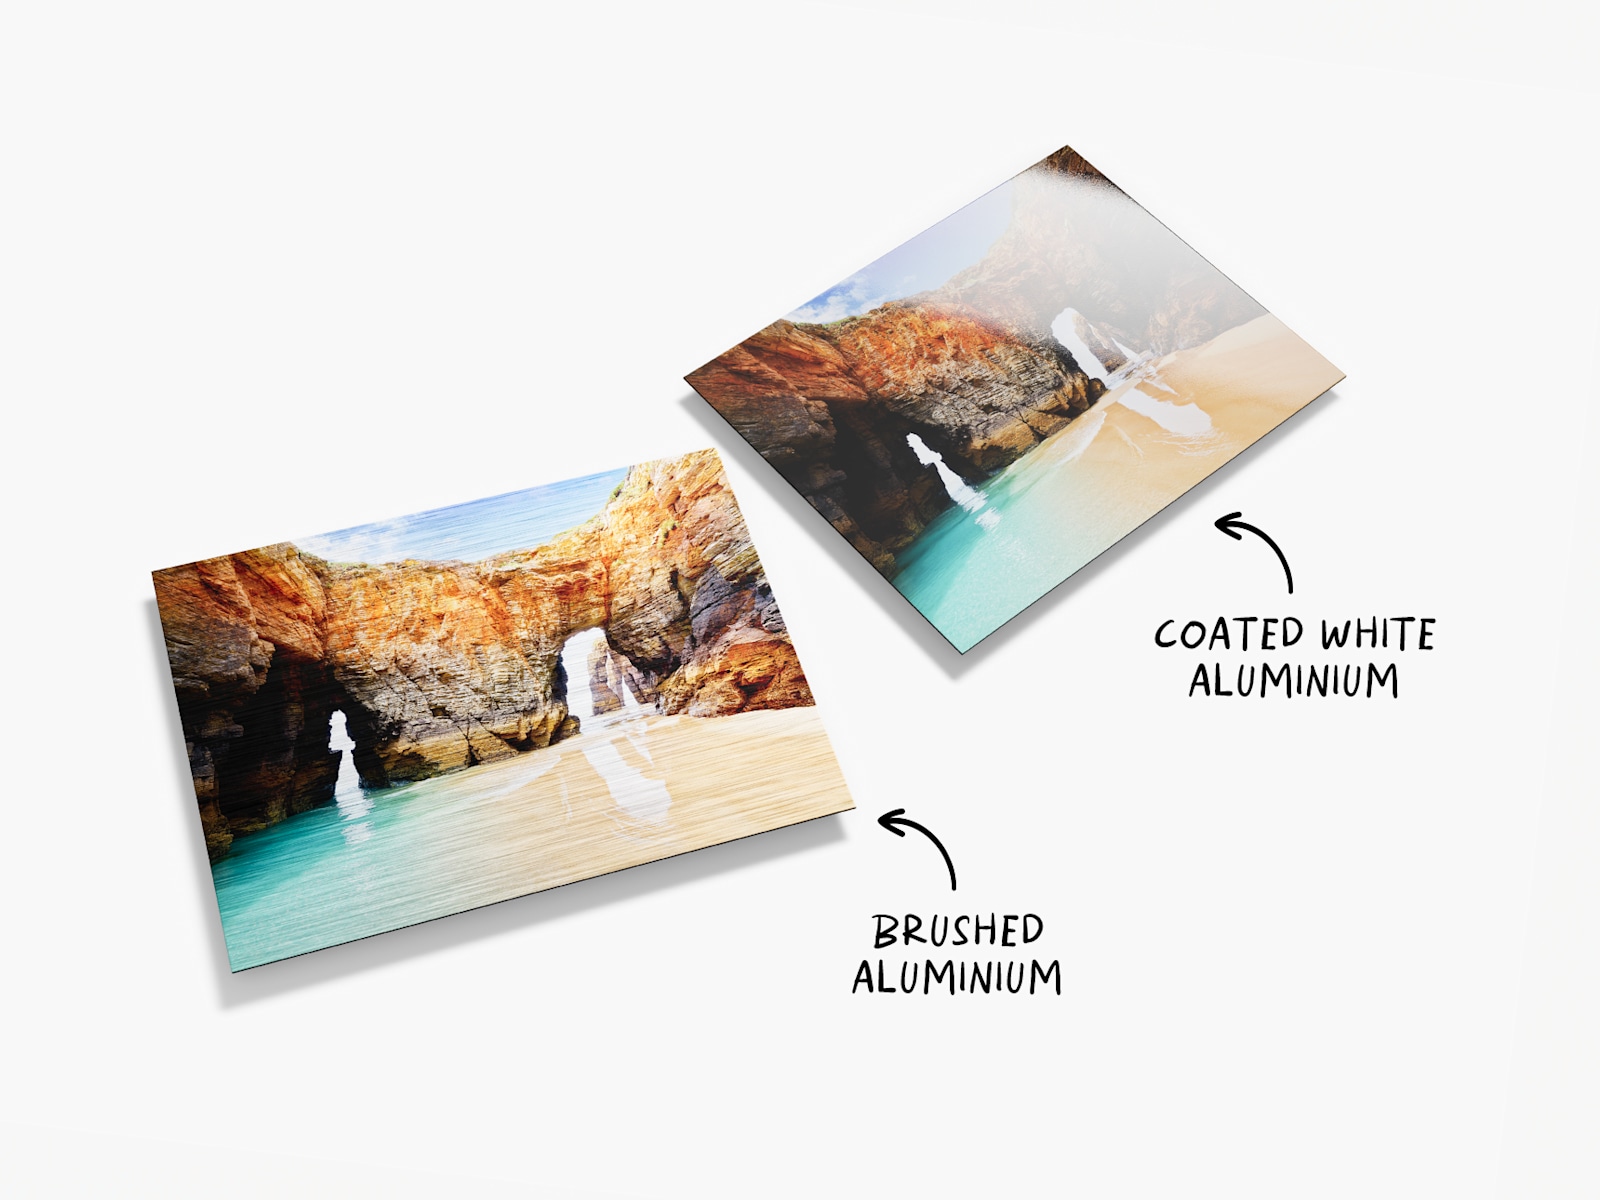 Two aluminium prints, both featuring landscape photos. There is text that reads that there are two material options, one being brushed aluminium and the other coated white aluminium.